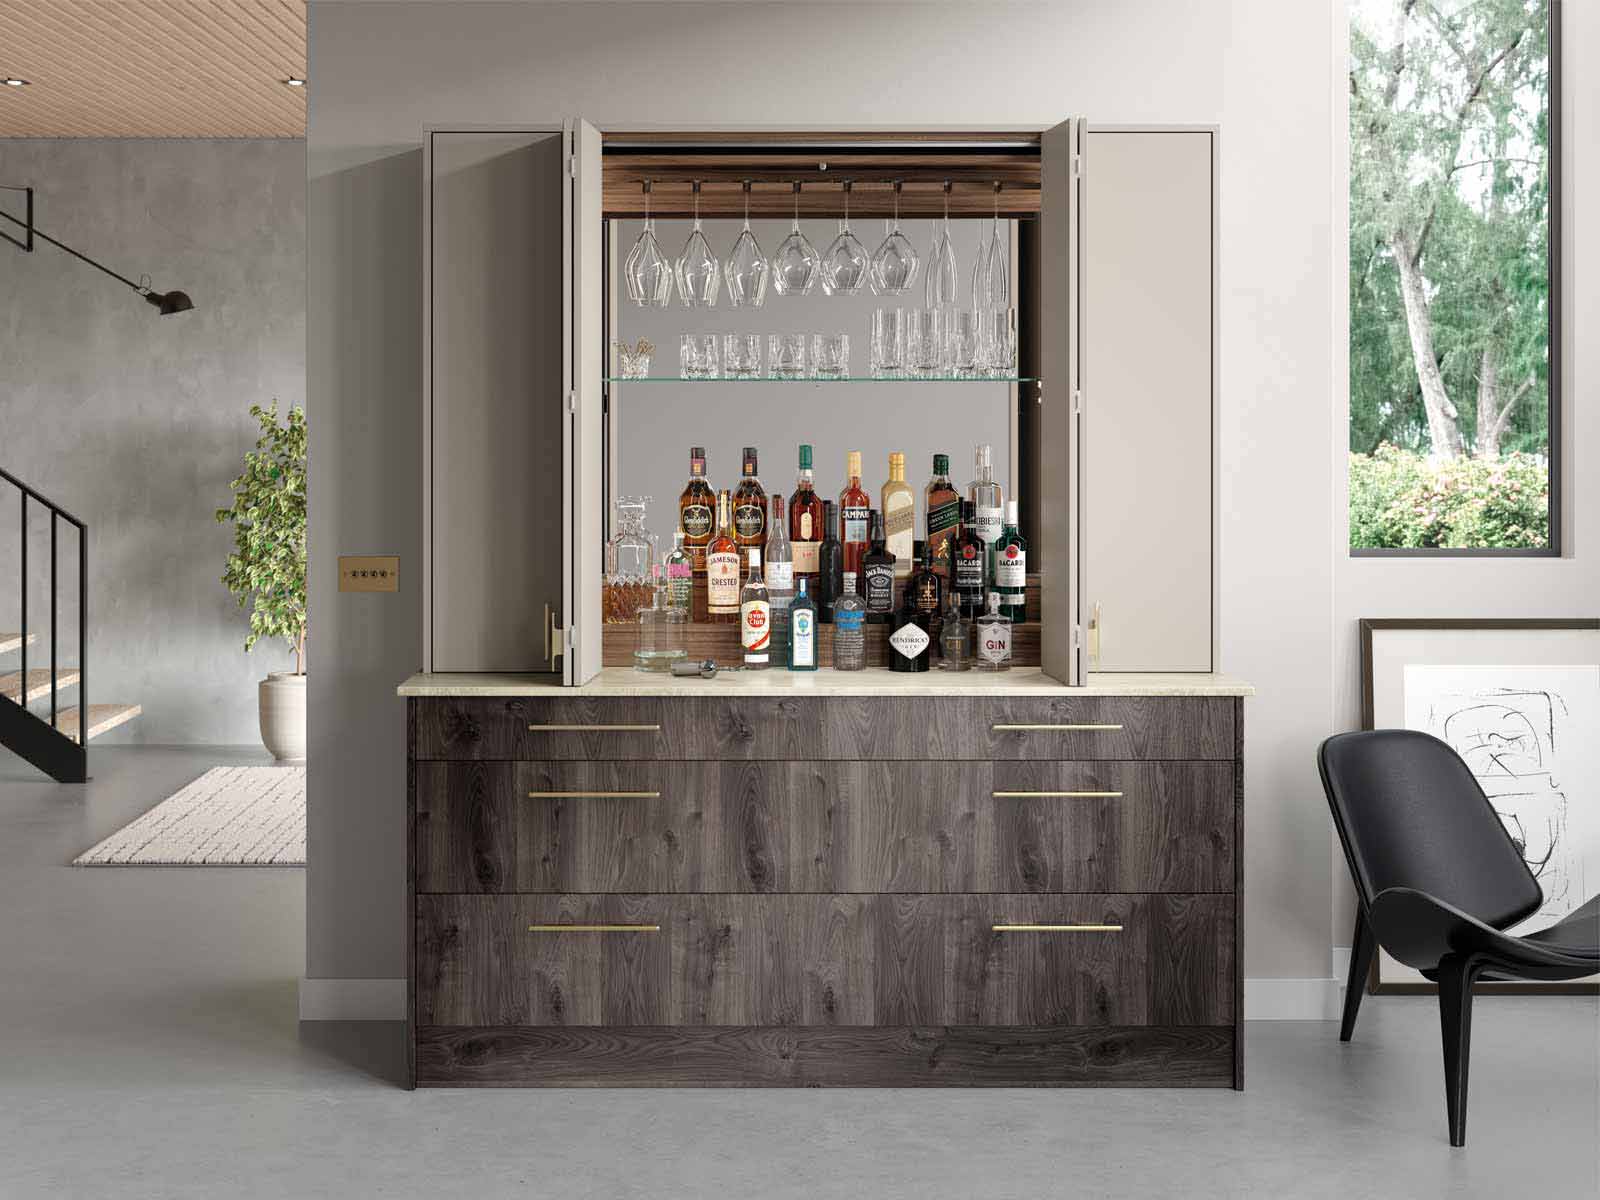 Fully stocked Bar dresser with rich wood shelves and a hanging wine rack